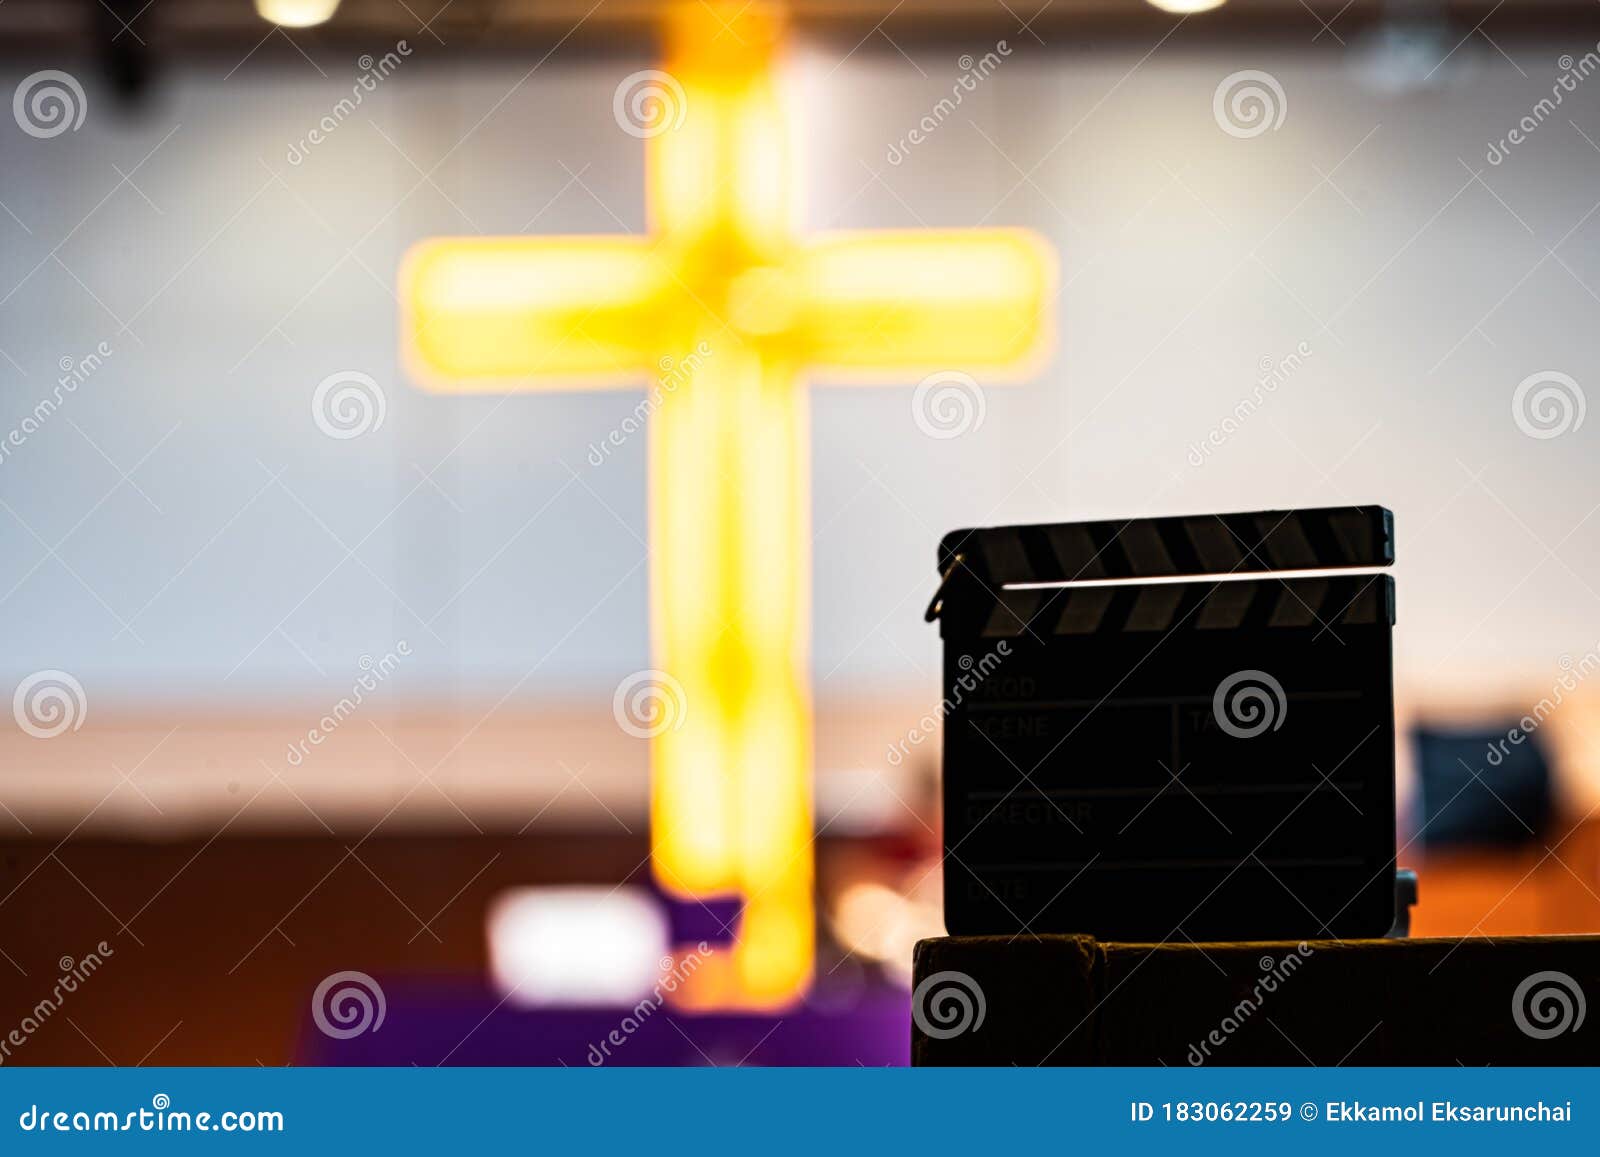 The Church Live Streaming Team is Preparing Program for the Christian Sunday  Service or Worship at the Church Stock Image - Image of bible, home:  183062259